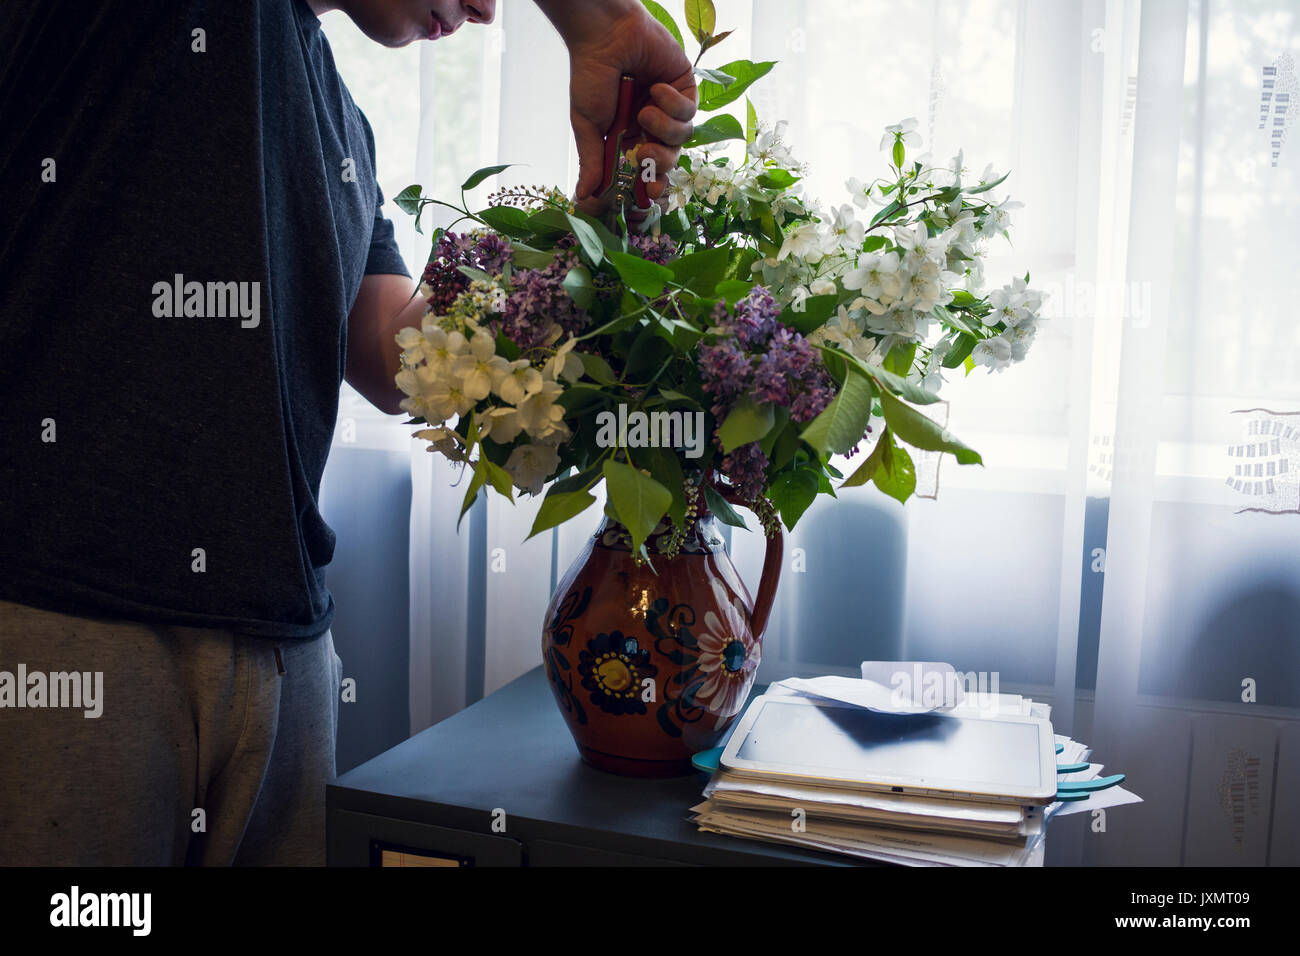 Mid section of young man arranging vase of flowers in front of window Stock Photo